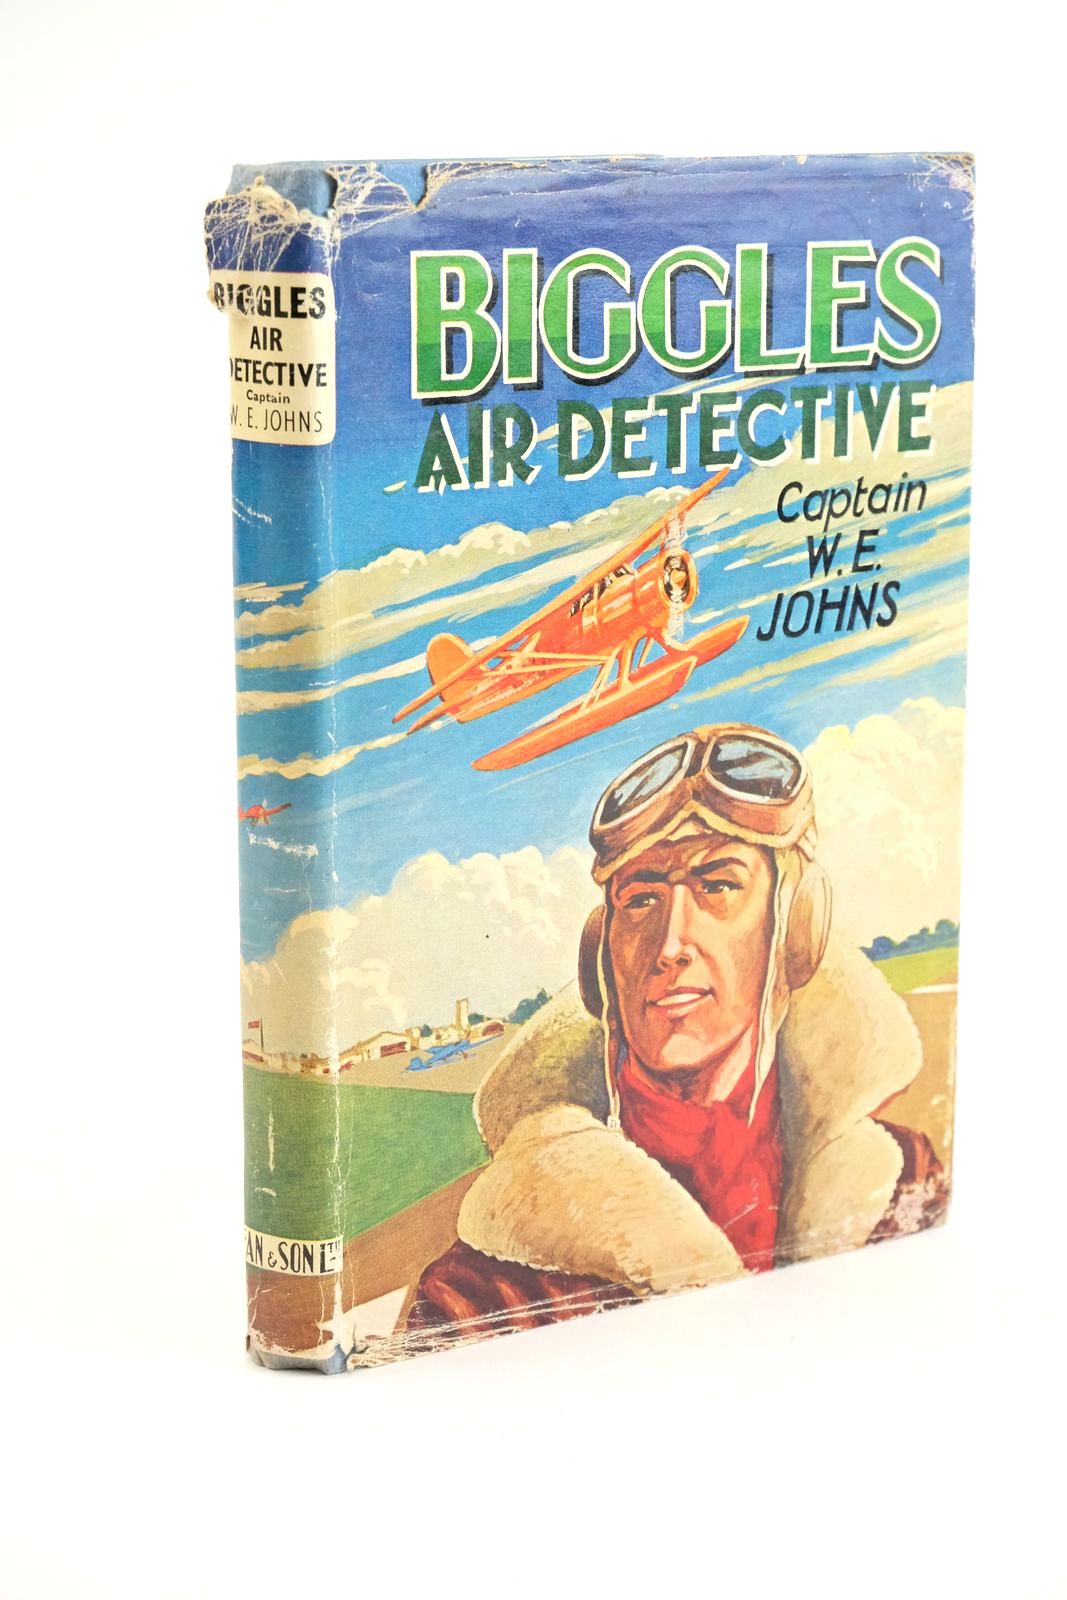 Photo of BIGGLES AIR DETECTIVE written by Johns, W.E. published by Dean &amp; Son Ltd. (STOCK CODE: 1323875)  for sale by Stella & Rose's Books